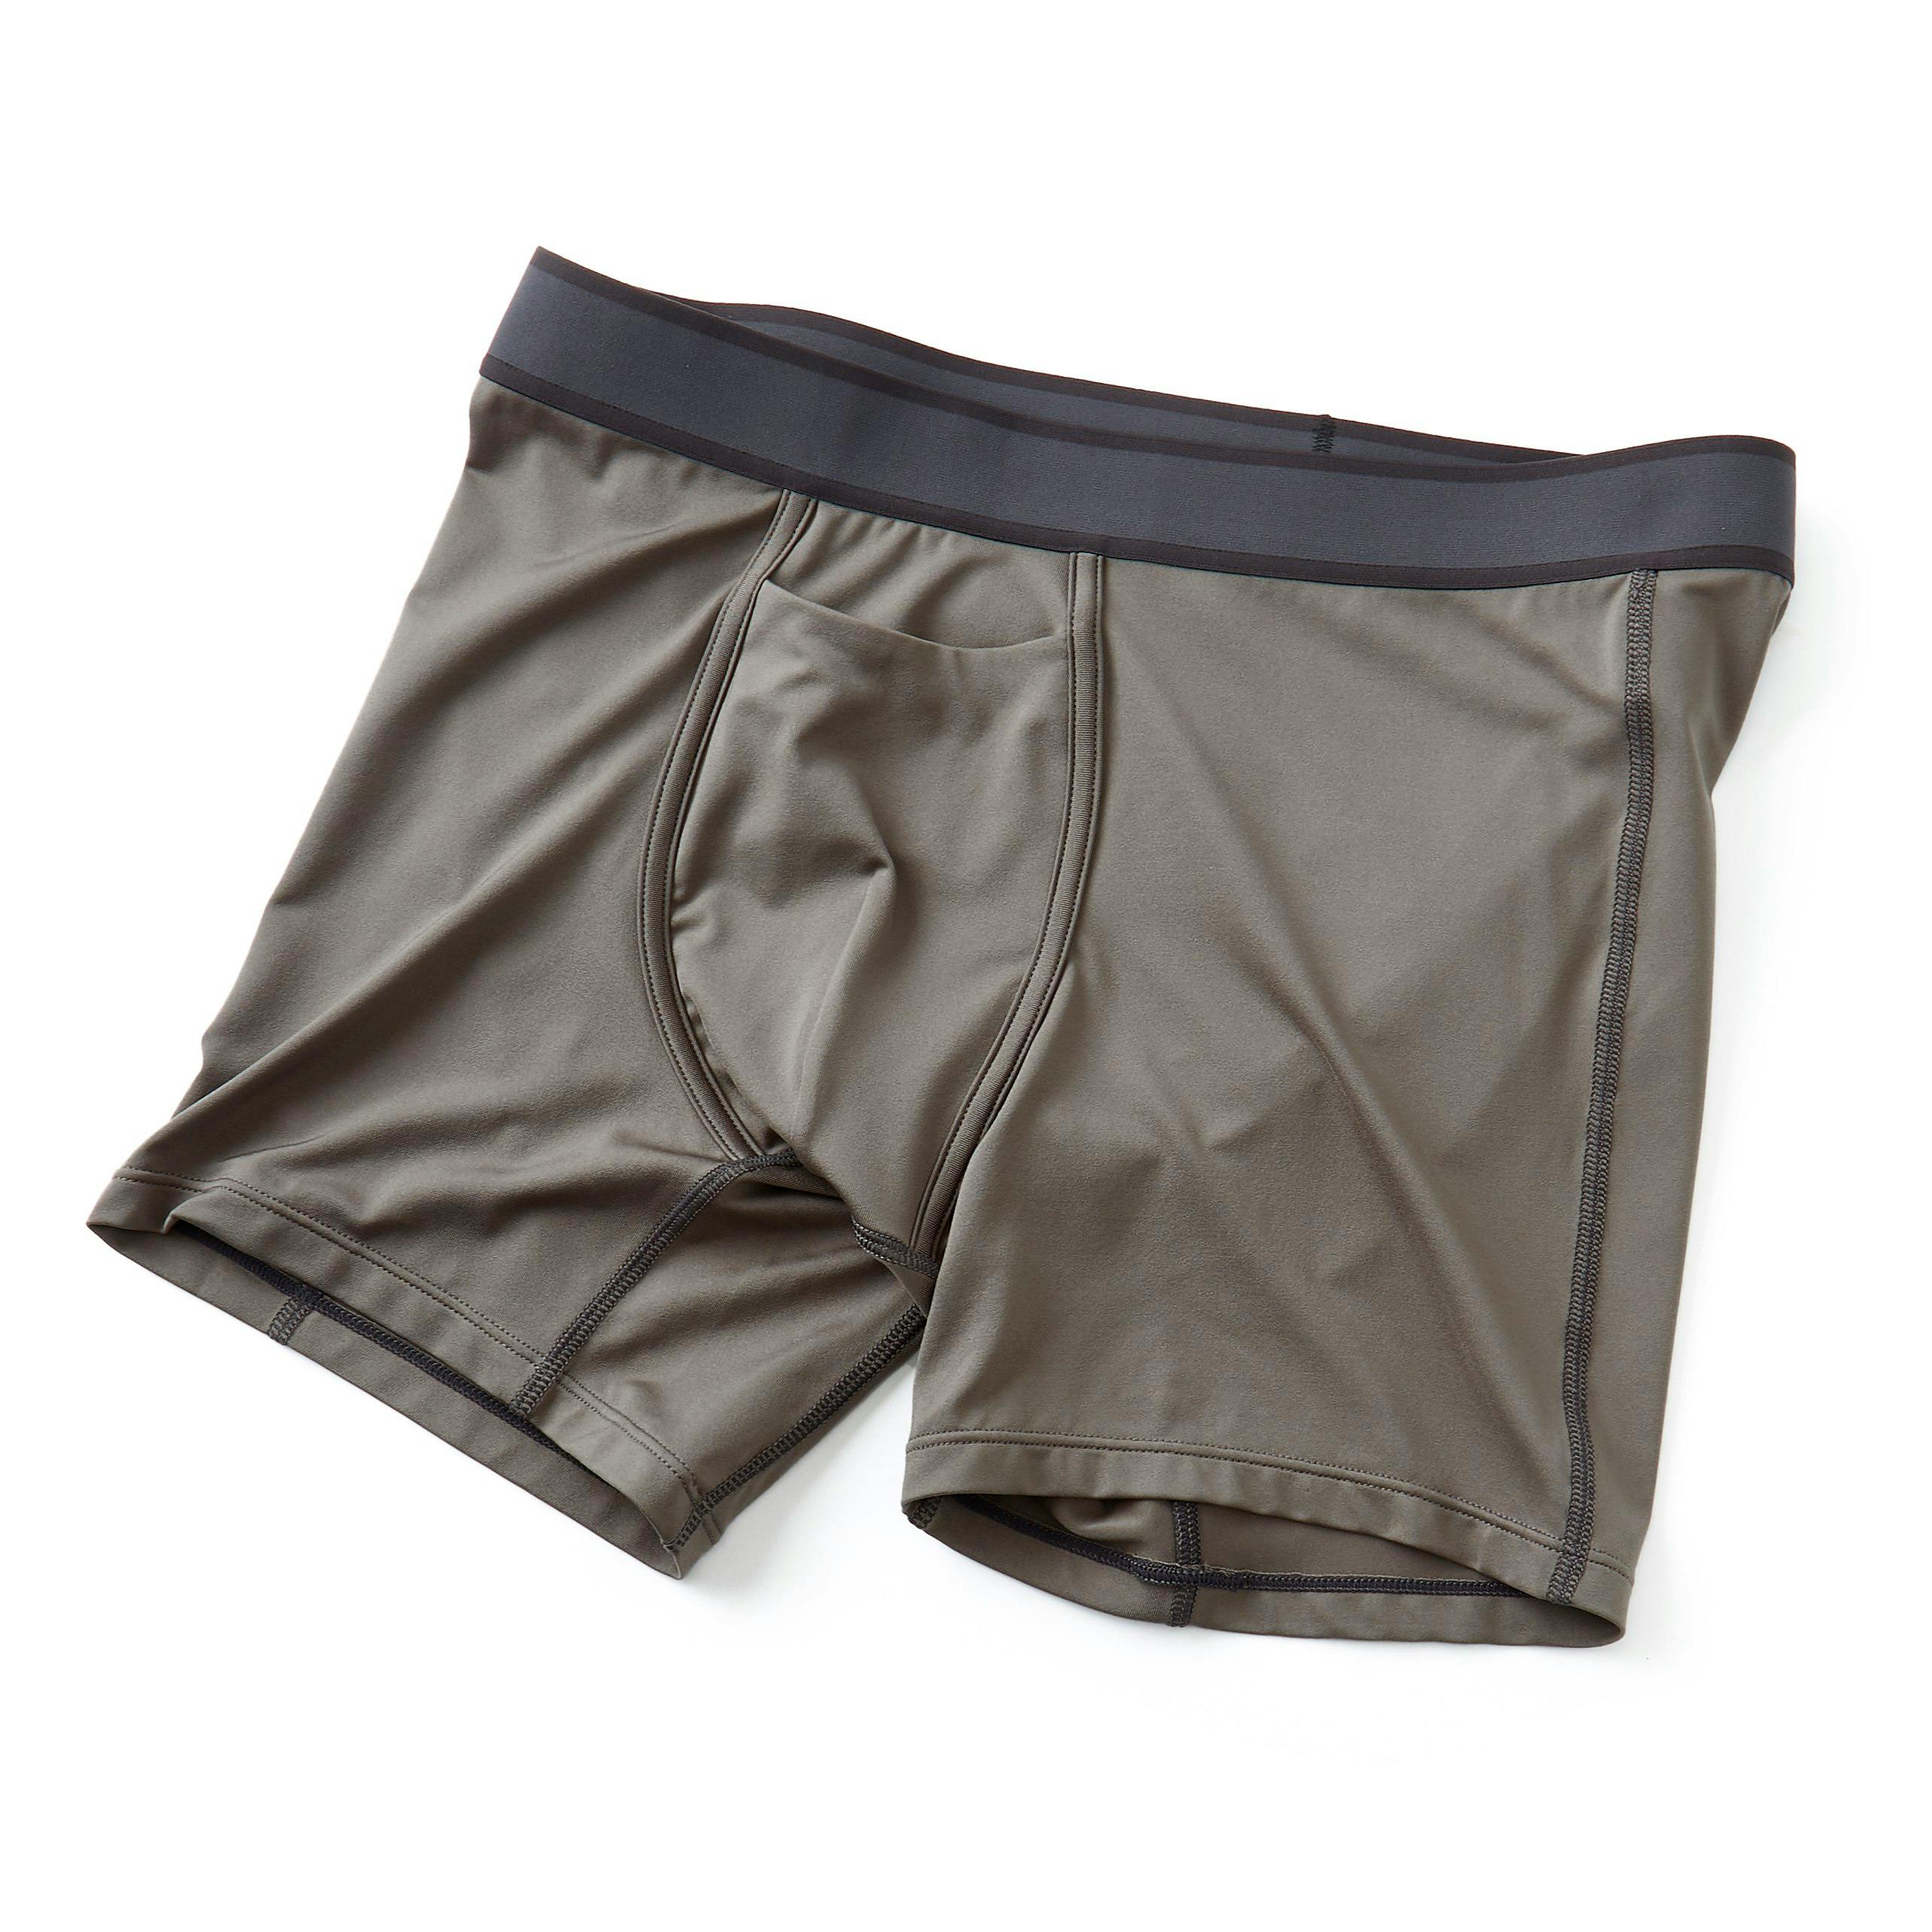 AIRism Boxer Briefs  [AIRism Boxer Briefs] Not only does it keep